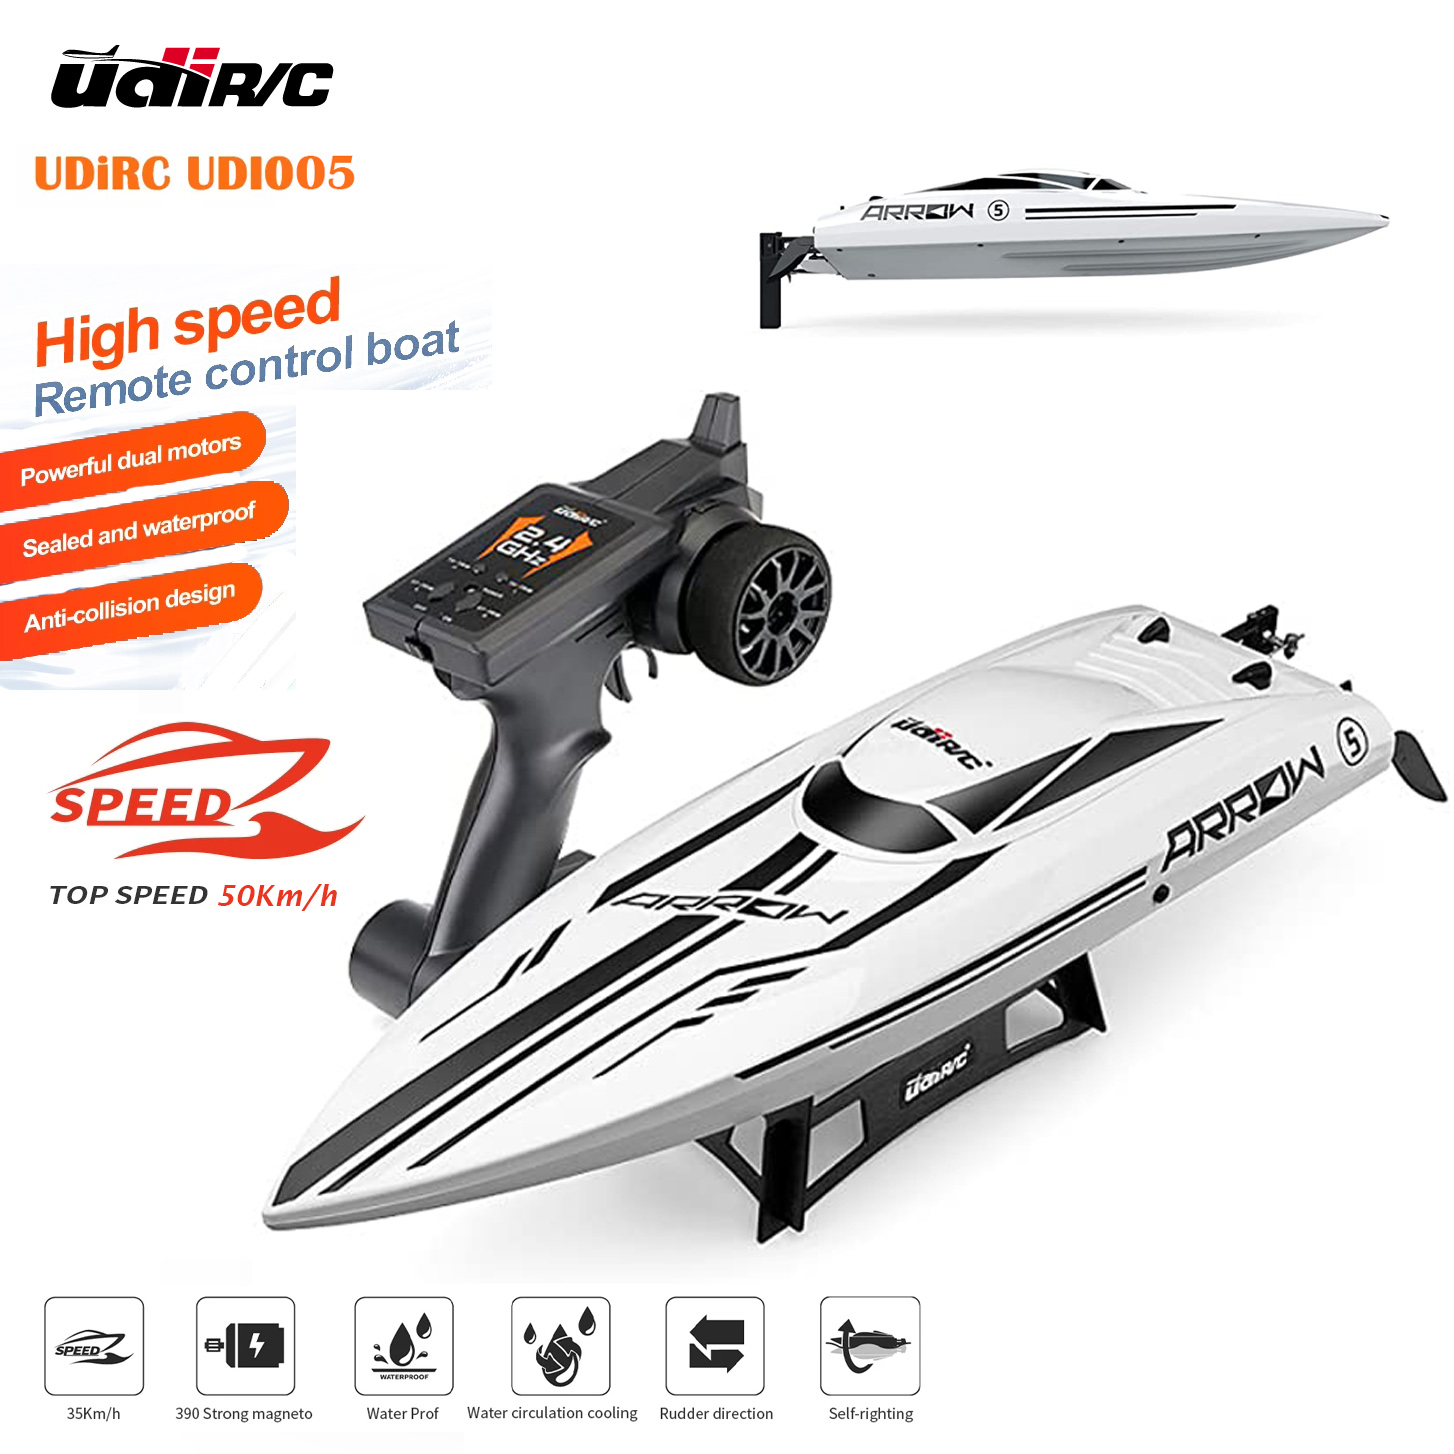 UDiRC UDI005 RC Fishing Boat 50Km/H High Speed Waterproof 2.4GHz Radio Control Boat Brushless Pvc Boat Toys Gift for Kids